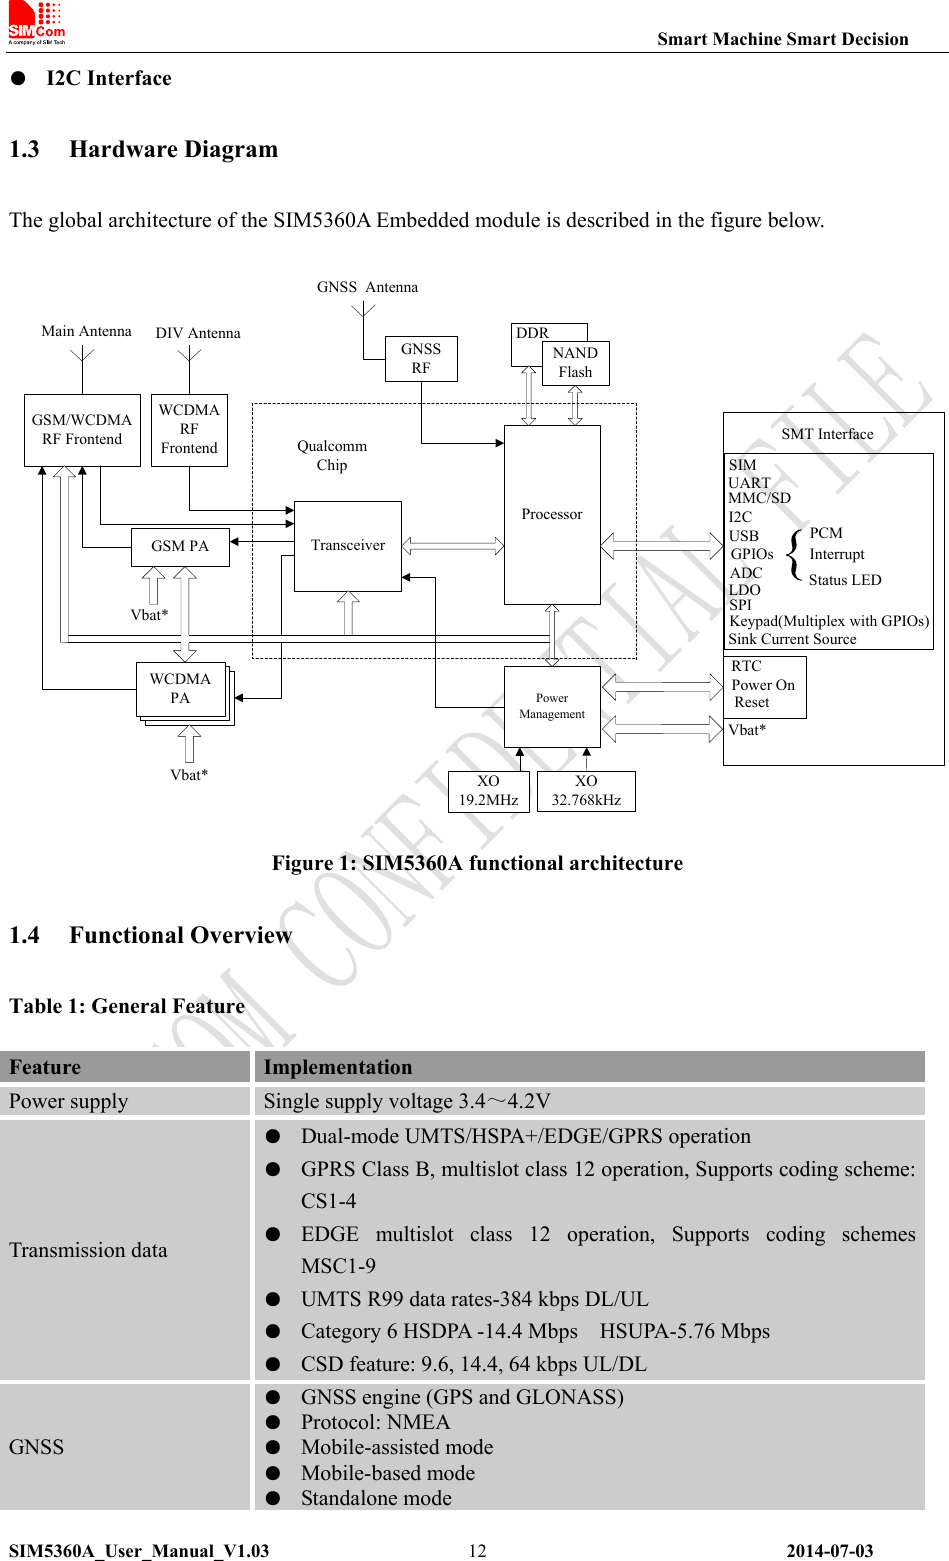                                                                Smart Machine Smart Decision SIM5360A_User_Manual_V1.03                 2014-07-03 12●  I2C Interface 1.3 Hardware Diagram The global architecture of the SIM5360A Embedded module is described in the figure below.  GSM/WCDMARF FrontendGSM PA TransceiverProcessorXO19.2MHzXO32.768kHzNANDFlashWCDMA PAMMC/SDI2CPCMInterruptStatus LEDUSBRTCSIMPower OnResetUARTGPIOsADCLDOVbat*Vbat*Vbat* SPIKeypad(Multiplex with GPIOs)Sink Current SourceDDRGNSS RFMain AntennaGNSS  AntennaPowerManagementQualcomm ChipSMT InterfaceWCDMARF FrontendDIV Antenna Figure 1: SIM5360A functional architecture 1.4 Functional Overview Table 1: General Feature Feature  Implementation Power supply  Single supply voltage 3.4～4.2V Transmission data ●  Dual-mode UMTS/HSPA+/EDGE/GPRS operation ●  GPRS Class B, multislot class 12 operation, Supports coding scheme: CS1-4 ●  EDGE  multislot  class  12  operation,  Supports  coding  schemes MSC1-9 ●  UMTS R99 data rates-384 kbps DL/UL ●  Category 6 HSDPA -14.4 Mbps    HSUPA-5.76 Mbps ●  CSD feature: 9.6, 14.4, 64 kbps UL/DL GNSS ●  GNSS engine (GPS and GLONASS) ●  Protocol: NMEA ●  Mobile-assisted mode ●  Mobile-based mode ●  Standalone mode 